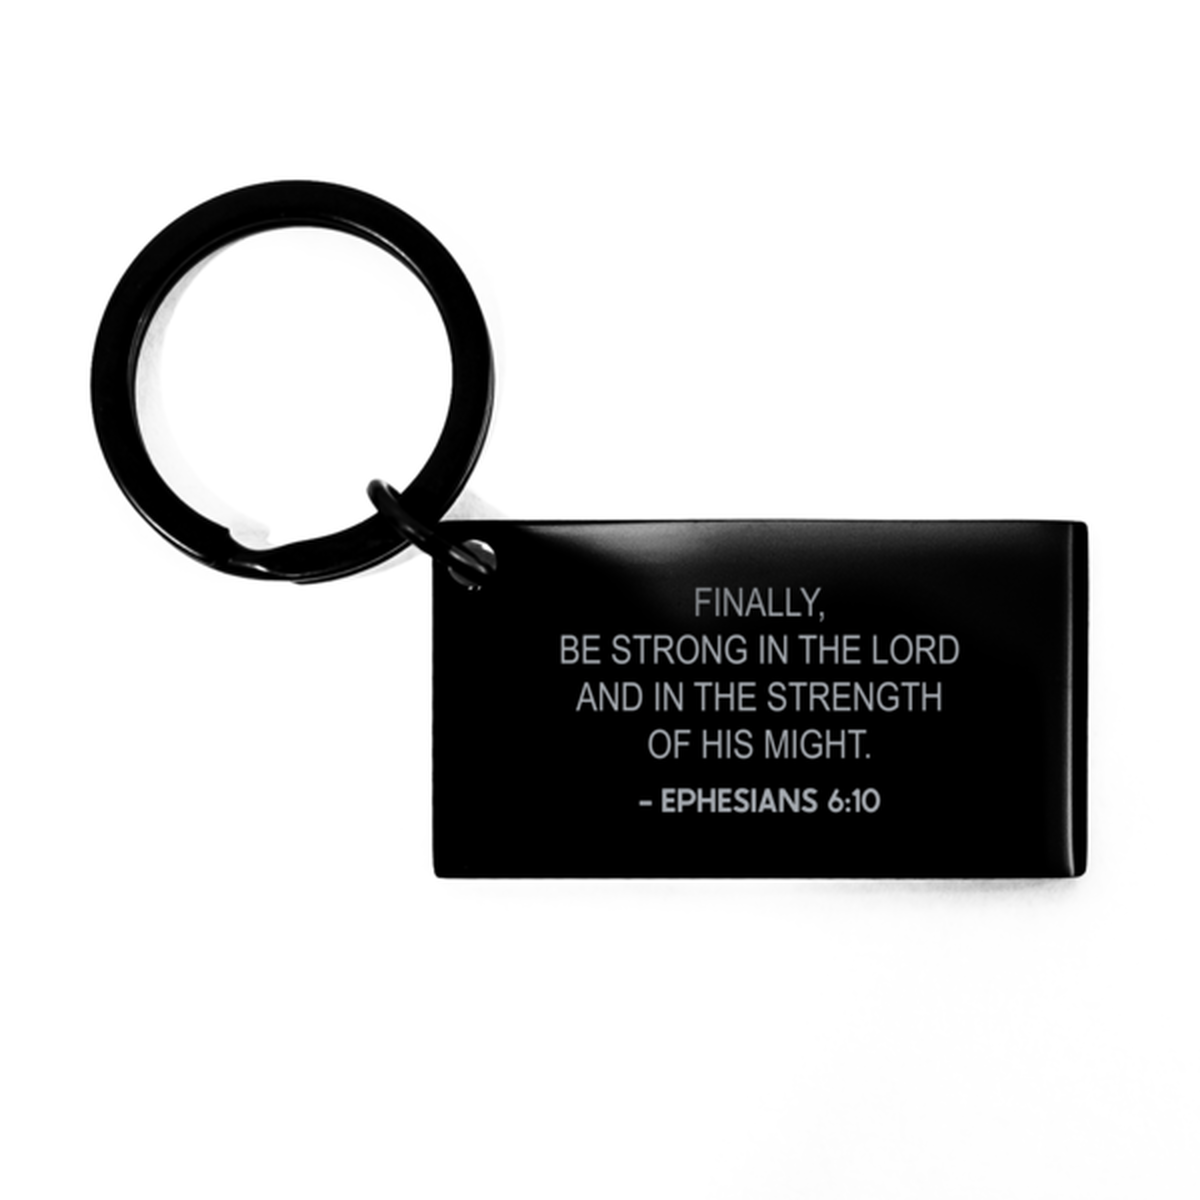 Bible Verse Black Keychain, Ephesians 6:10 Finally, Be Strong In The Lord And In The, Christian Inspirational Key Ring Gifts For Men Women